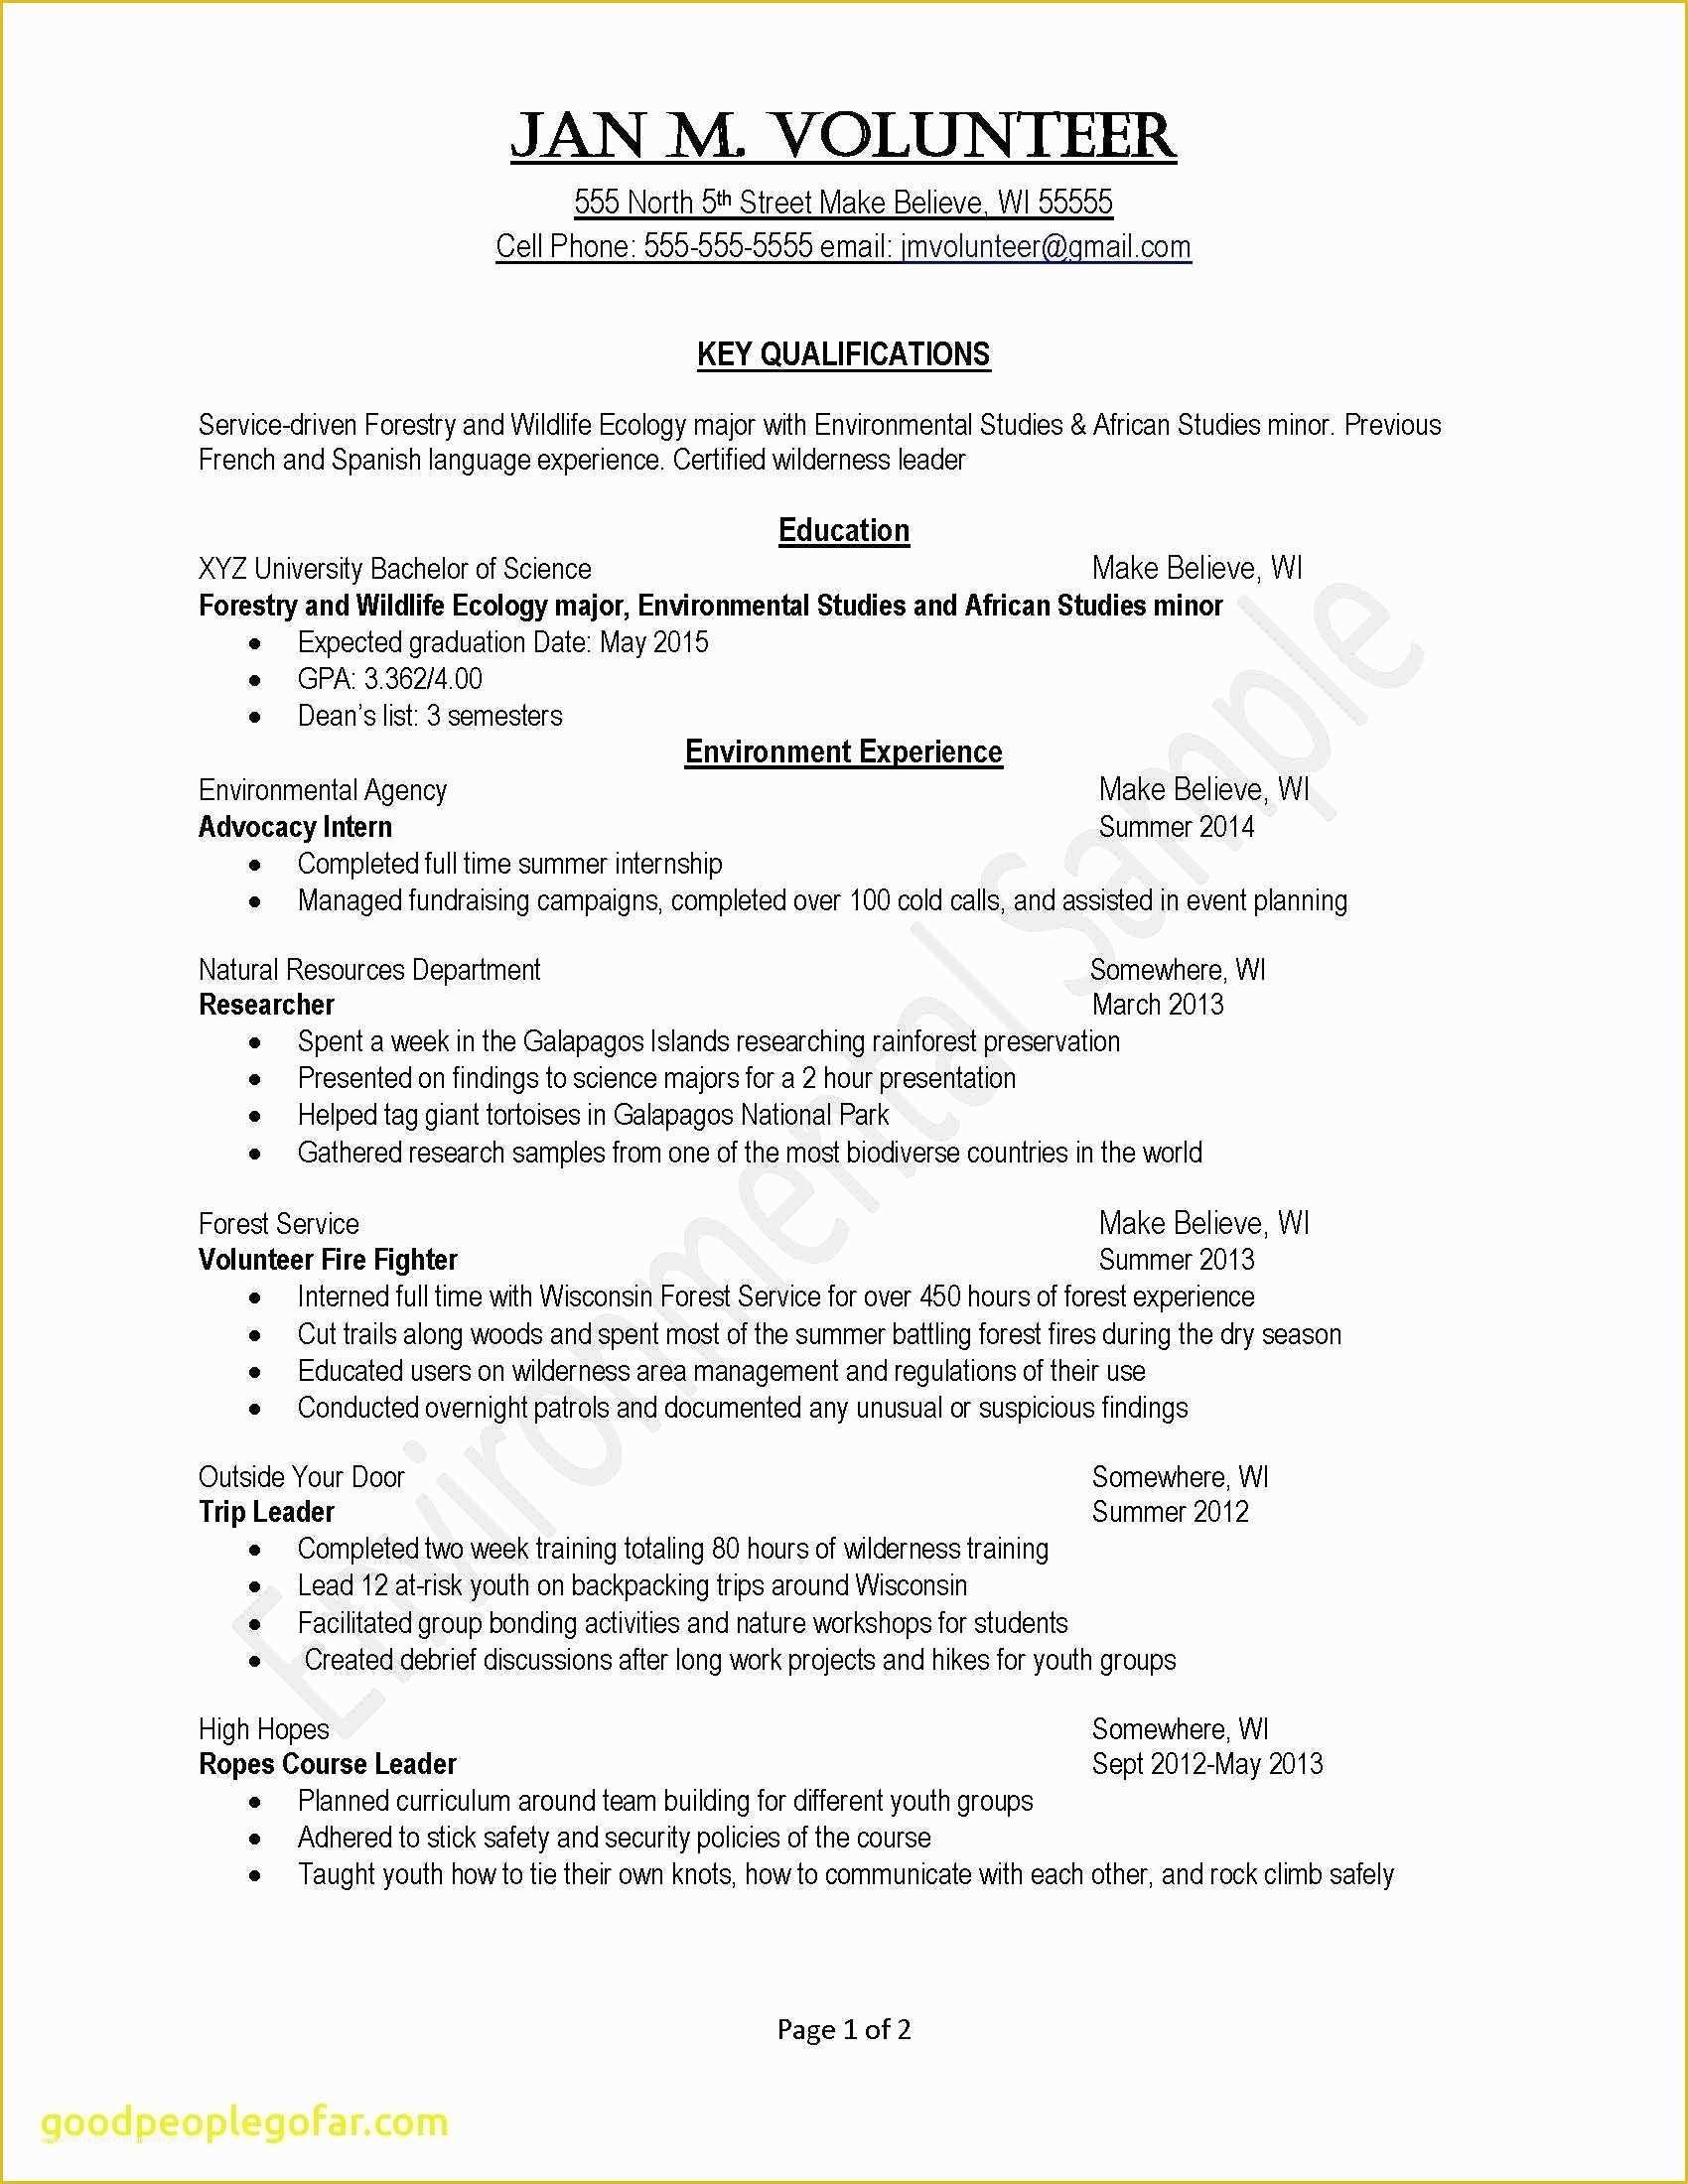 Resume Templates that are Actually Free Of New Free Professional Resume Templates Microsoft Word 2007